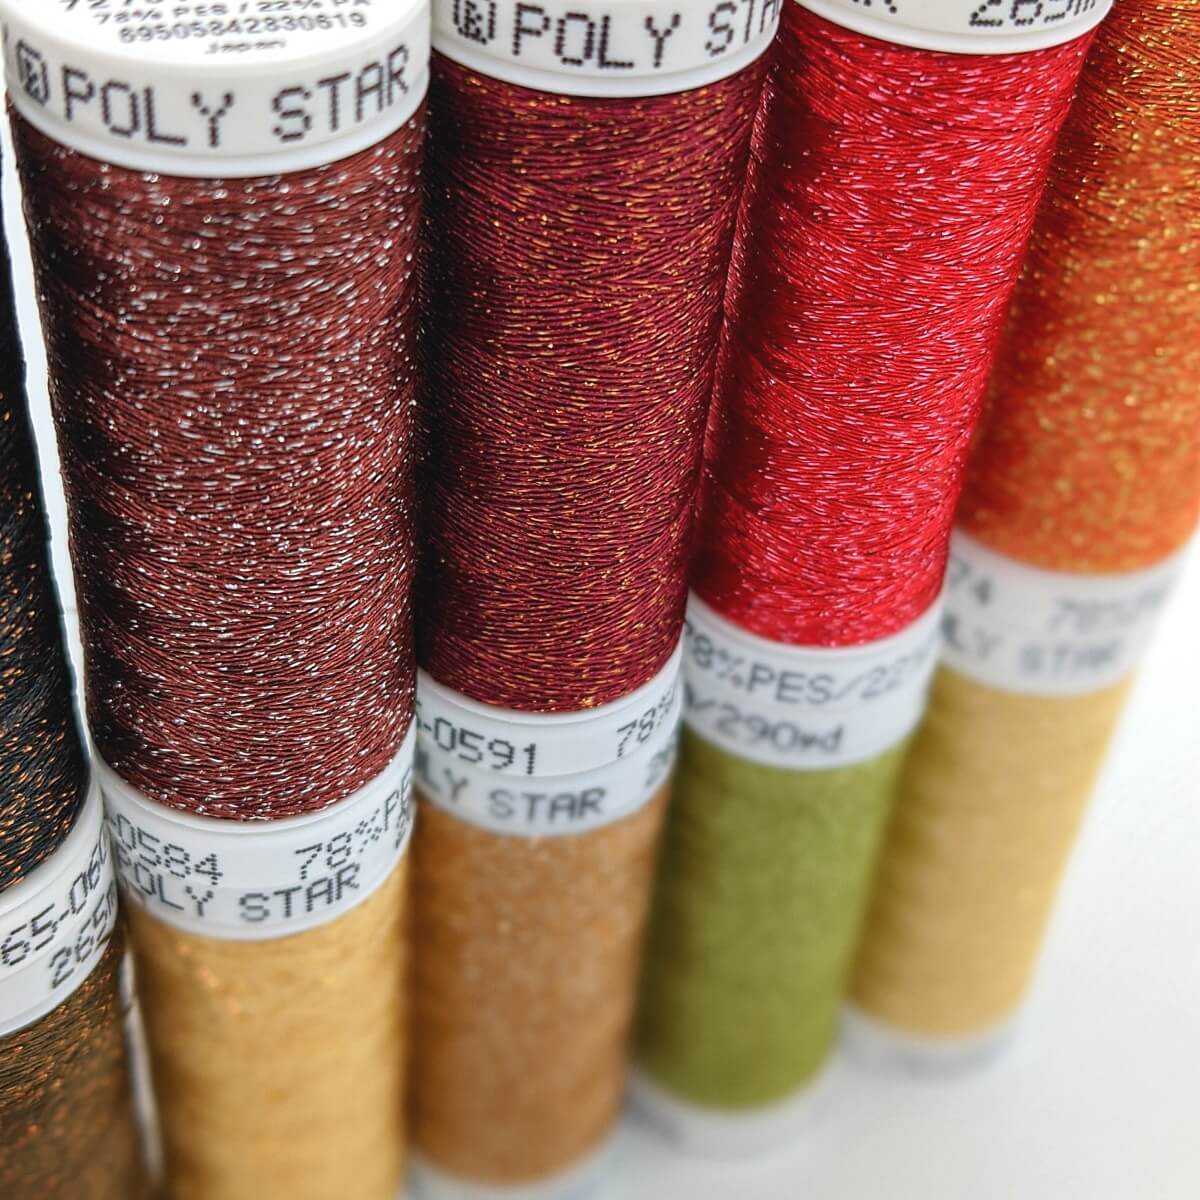 SULKY POLY SPARKLE 30 - Glittering Autumn
(10x 265m Snap Spools)